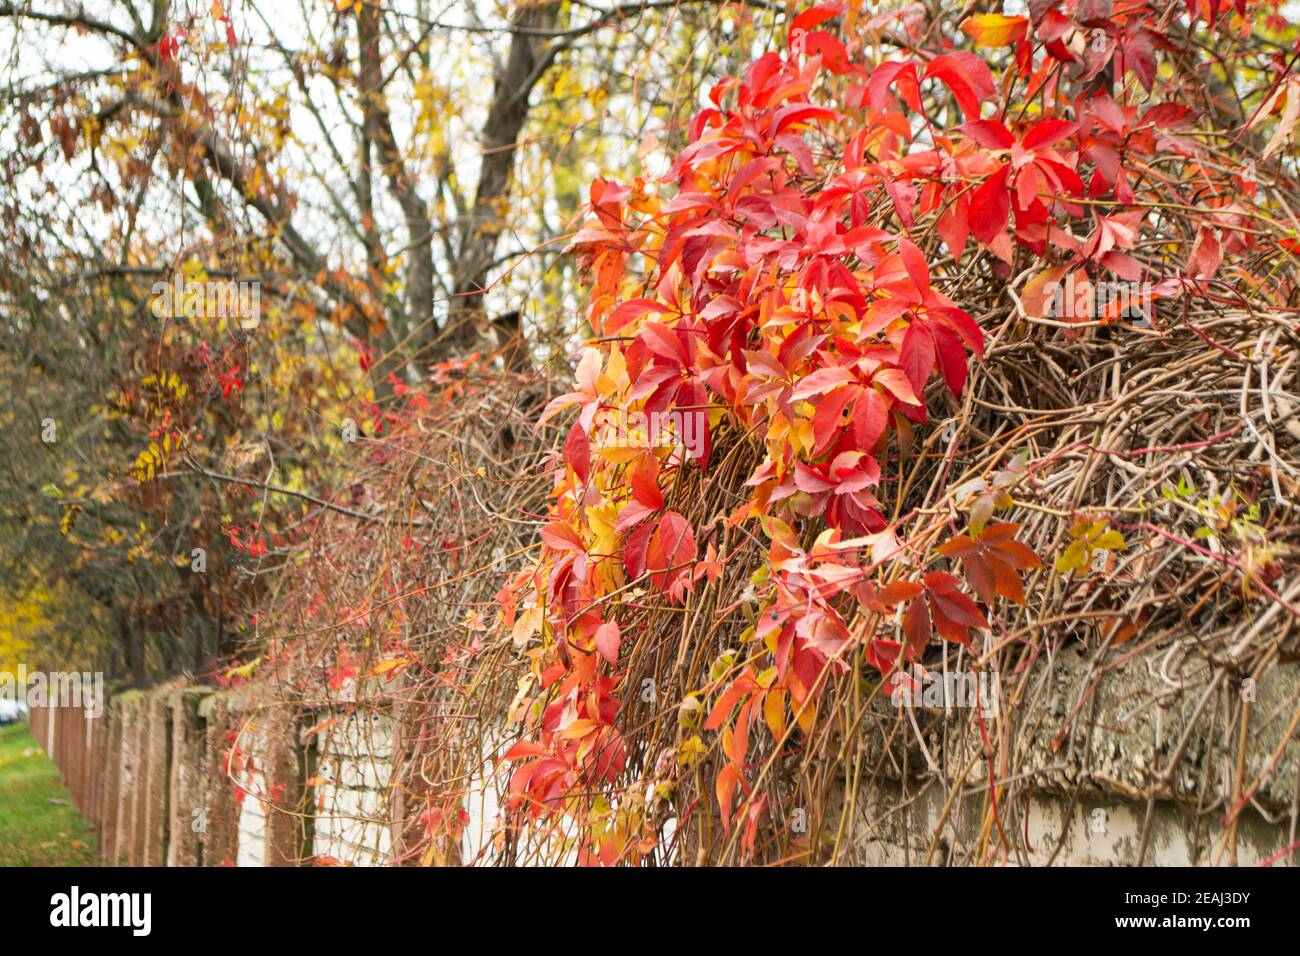 The bright red leaves of maiden grapes in the city landscape. Climbing plant on a fence mesh. Stock Photo